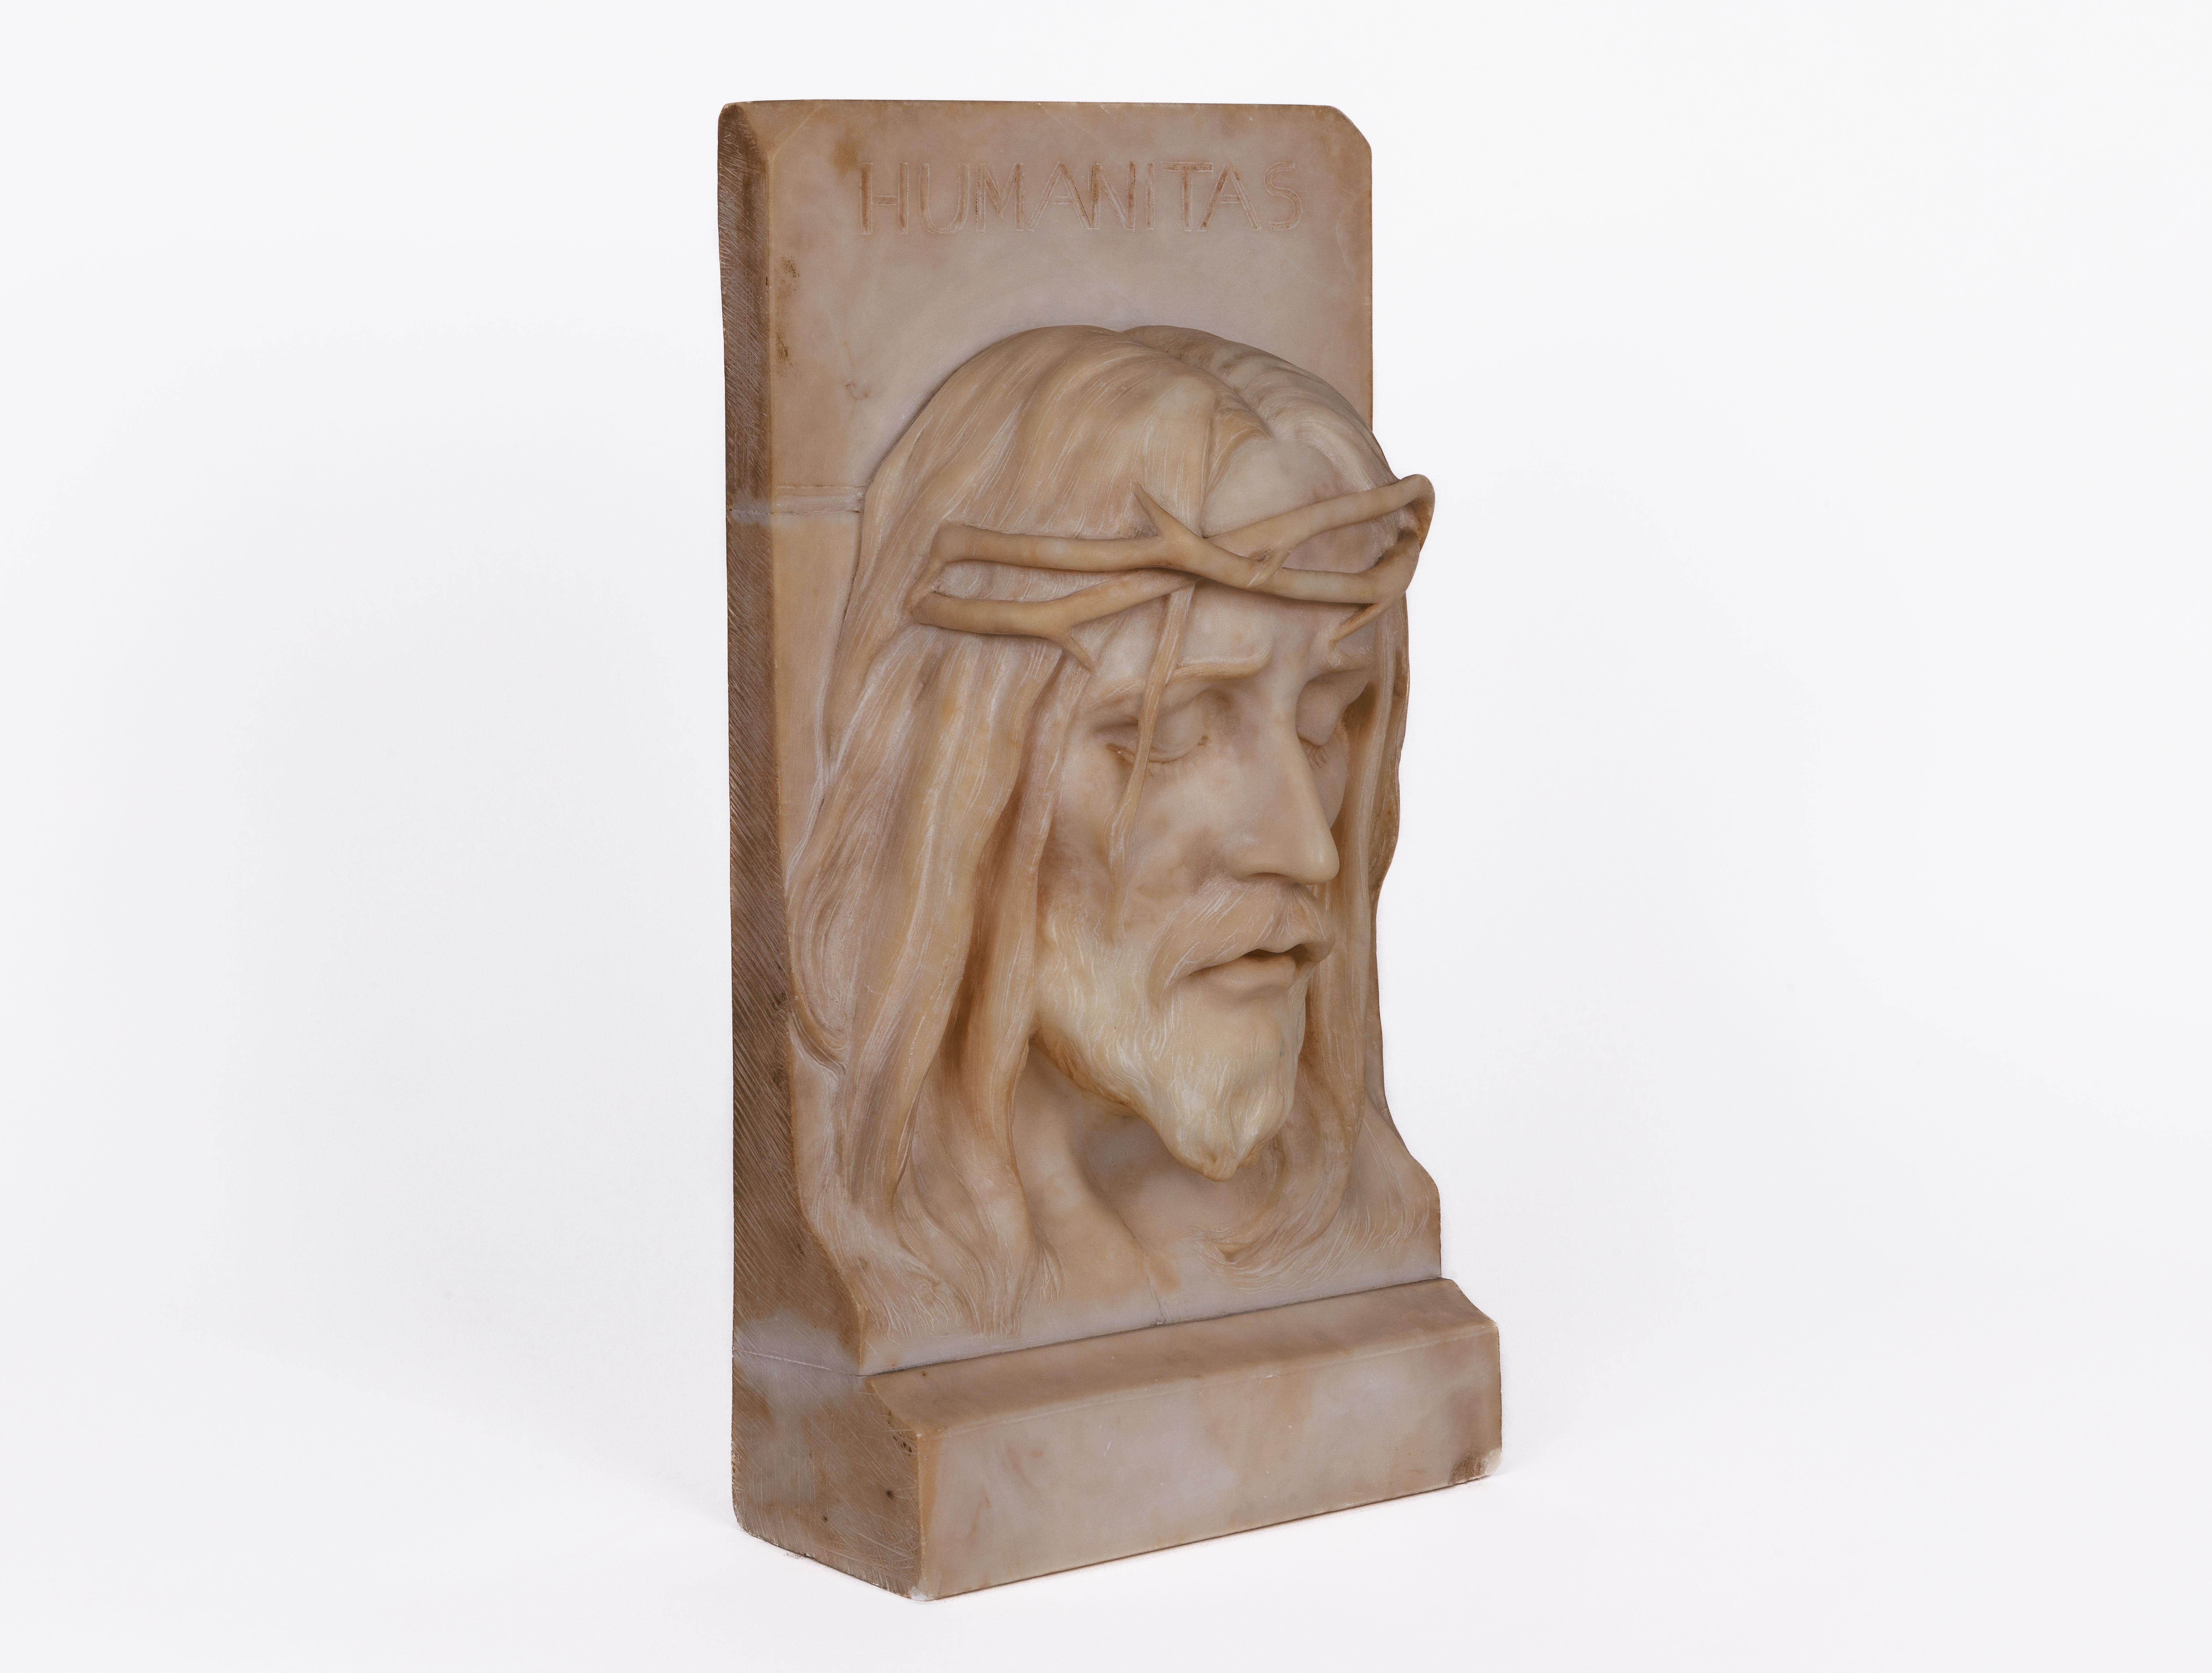 Rare and Important Italian Alabaster Bust Sculpture of Jesus Christ, C. 1860 For Sale 4